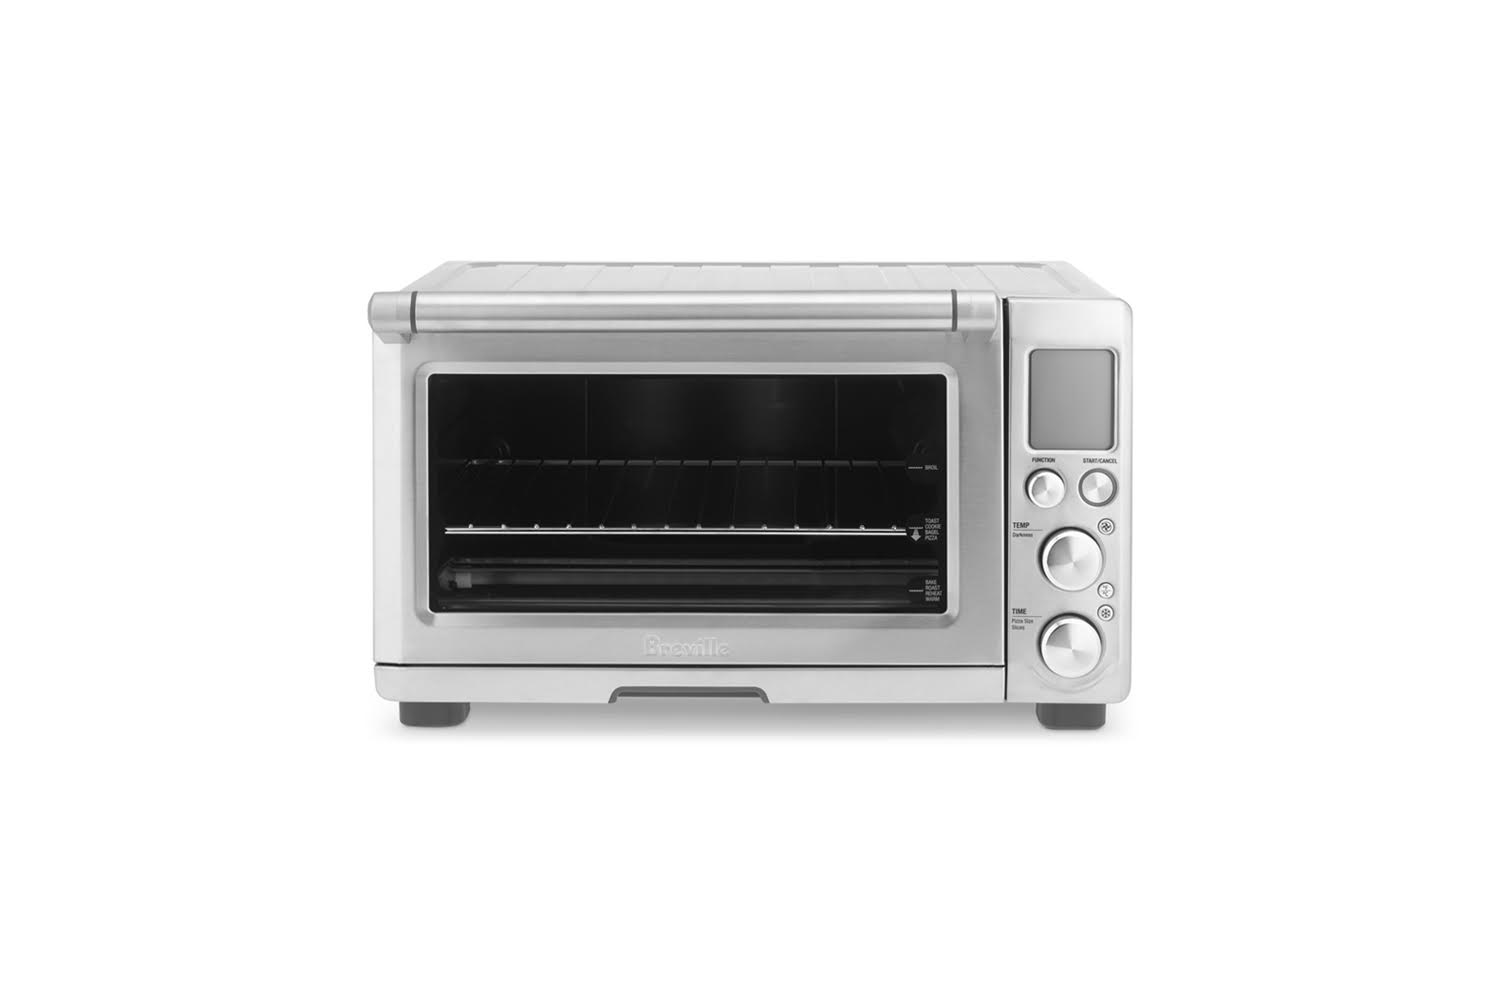 your compact cooktop needs a partner: a new generation countertop oven. what us 18